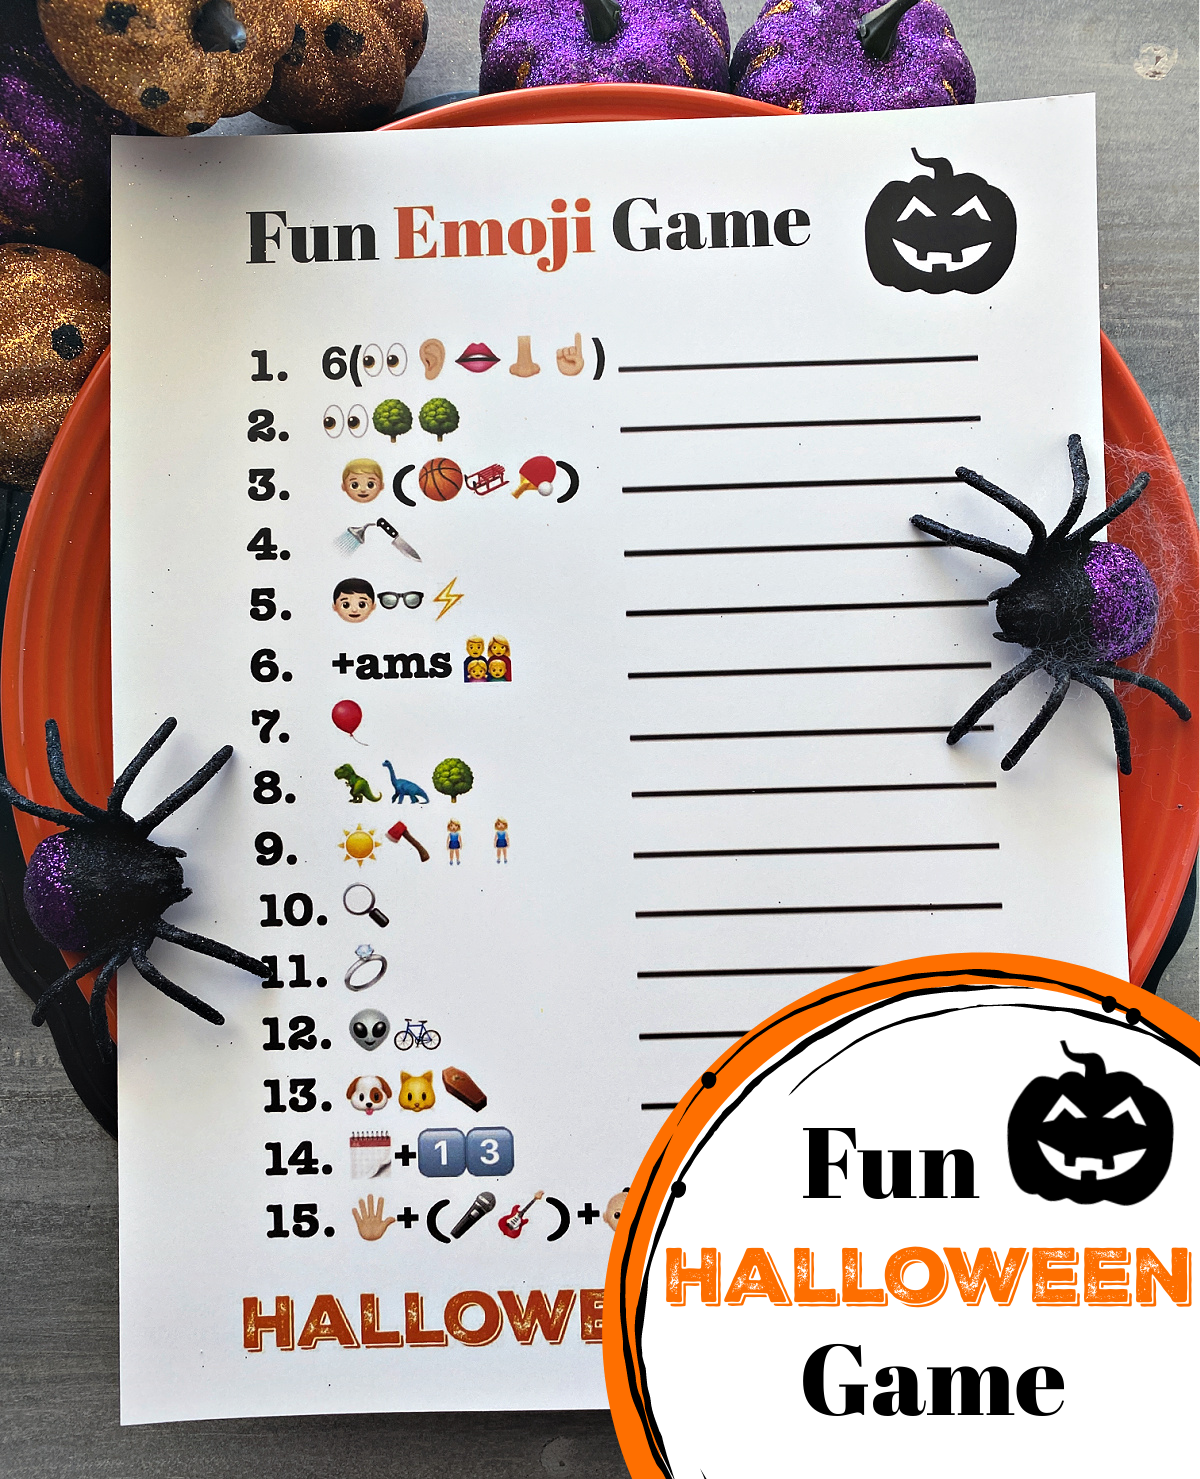 Fun Adult game for Halloween. This fun emoji game is perfect for your next Halloween party. Simple print and play. #halloweengame #funhalloweengame #emojigameforhalloween